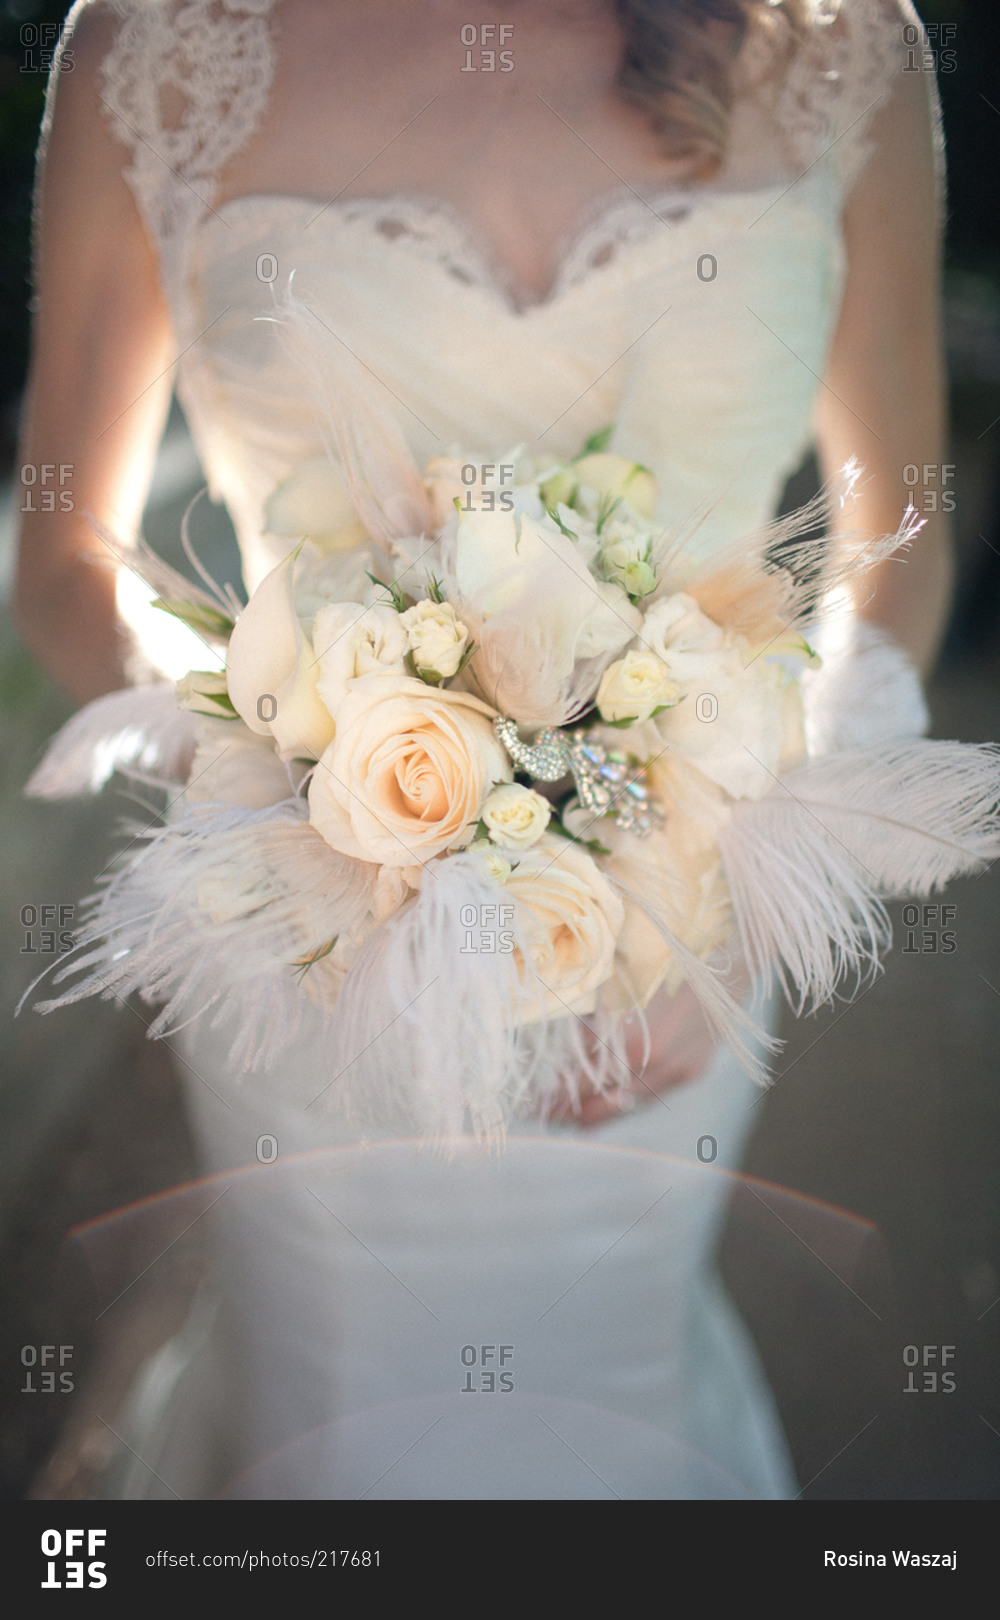 A bride holds her bouquet filled with feathers and roses